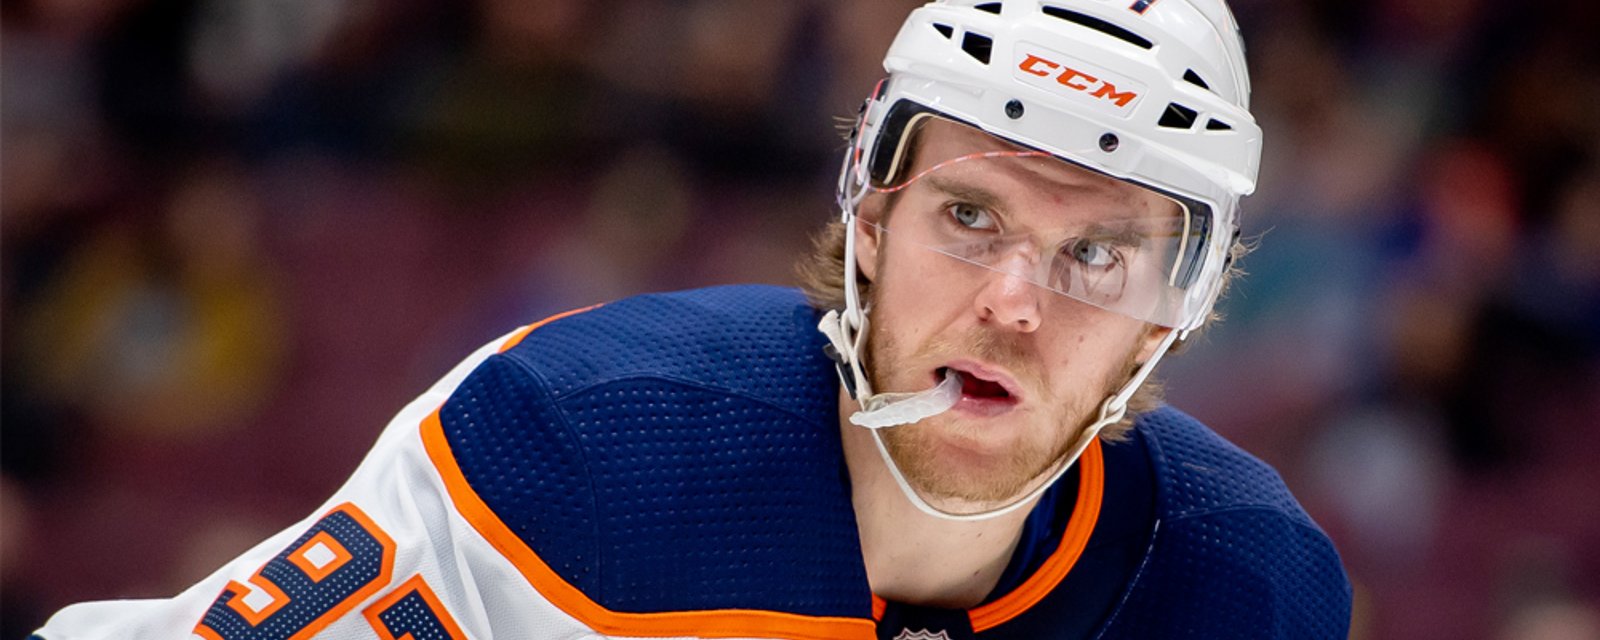 McDavid and other Oilers players directed to leave Edmonton by NHL